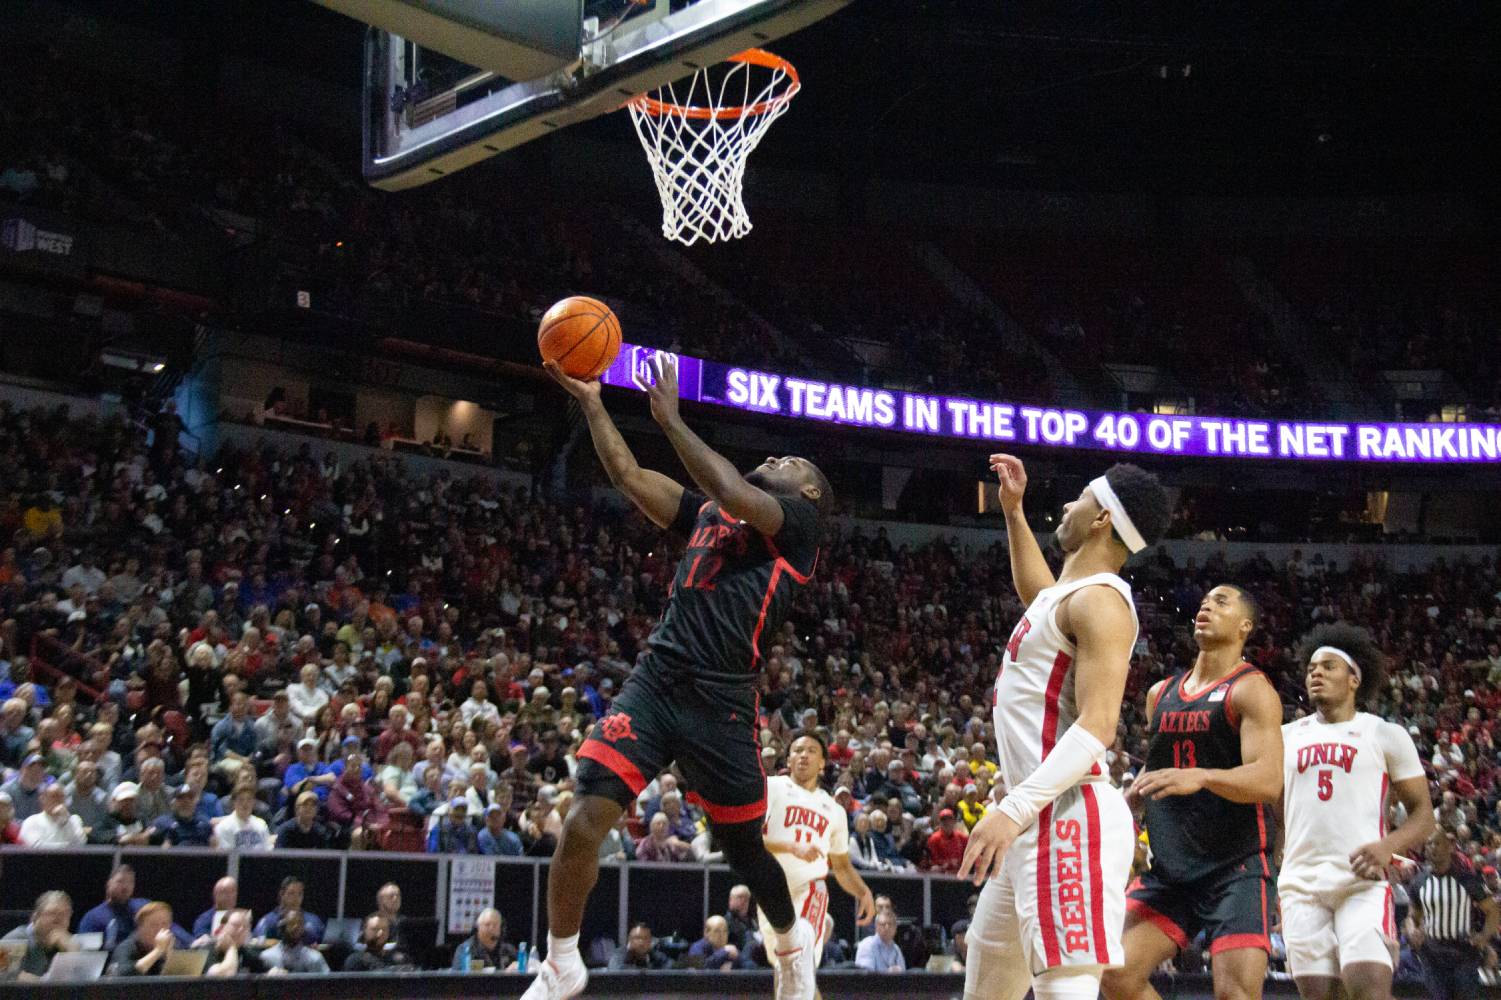 San Diego State guard Darrion Trammell lays up the ball in the paint over a pair of UNLV defenders earlier this season at Thomas & Mack Center. Trammell had 18 points in the second round win over Yale 85-57 on March 24. 